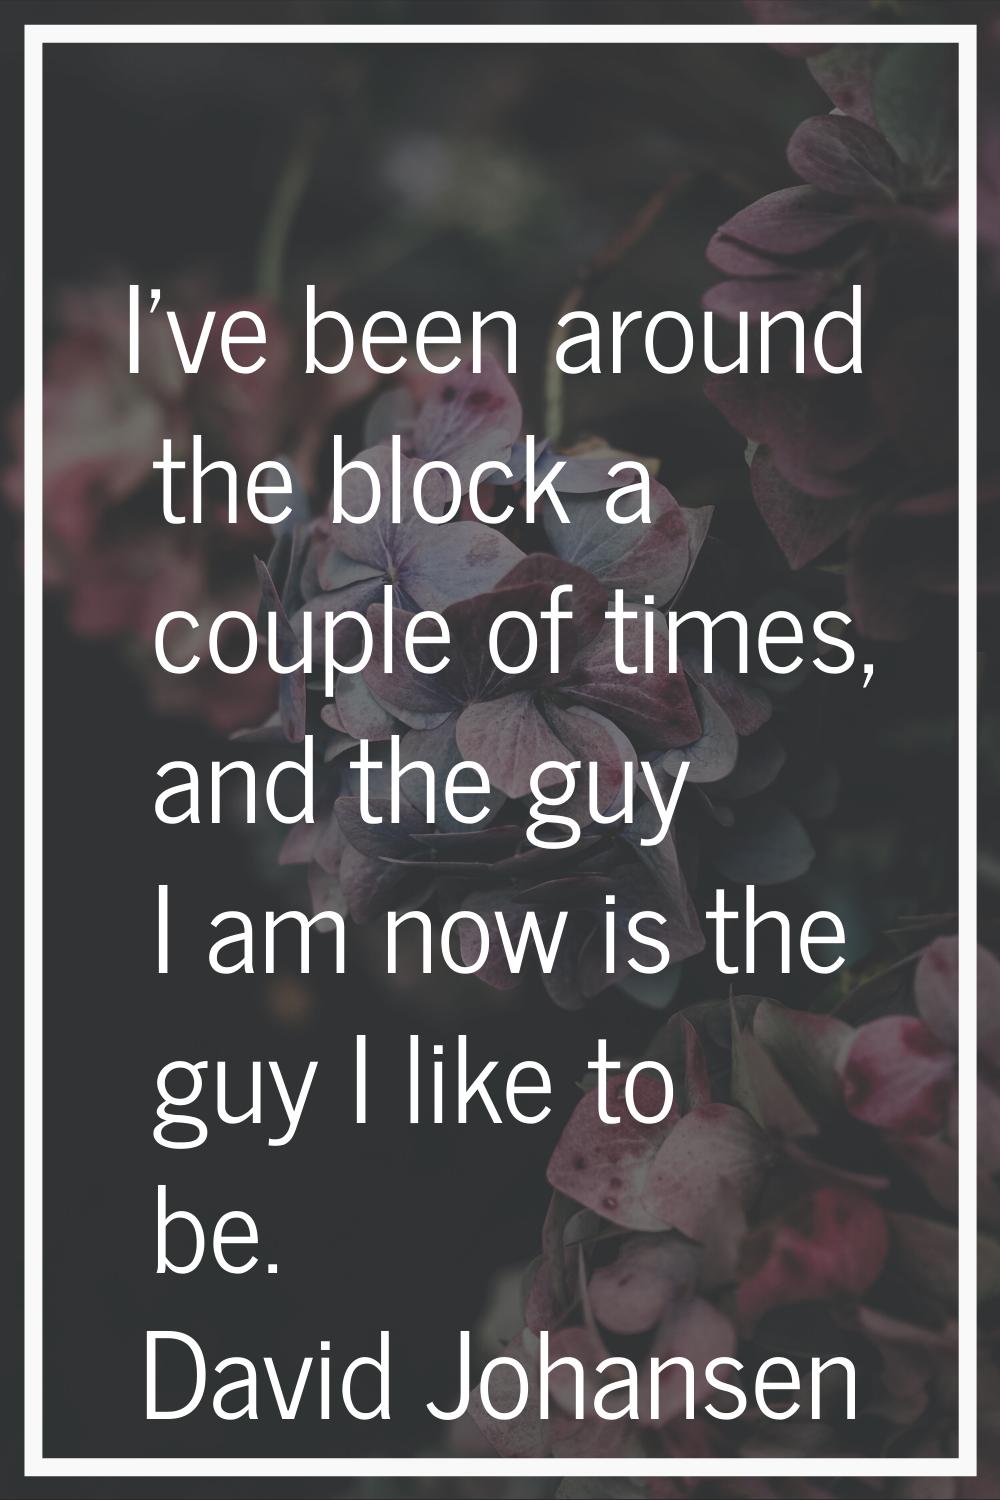 I've been around the block a couple of times, and the guy I am now is the guy I like to be.